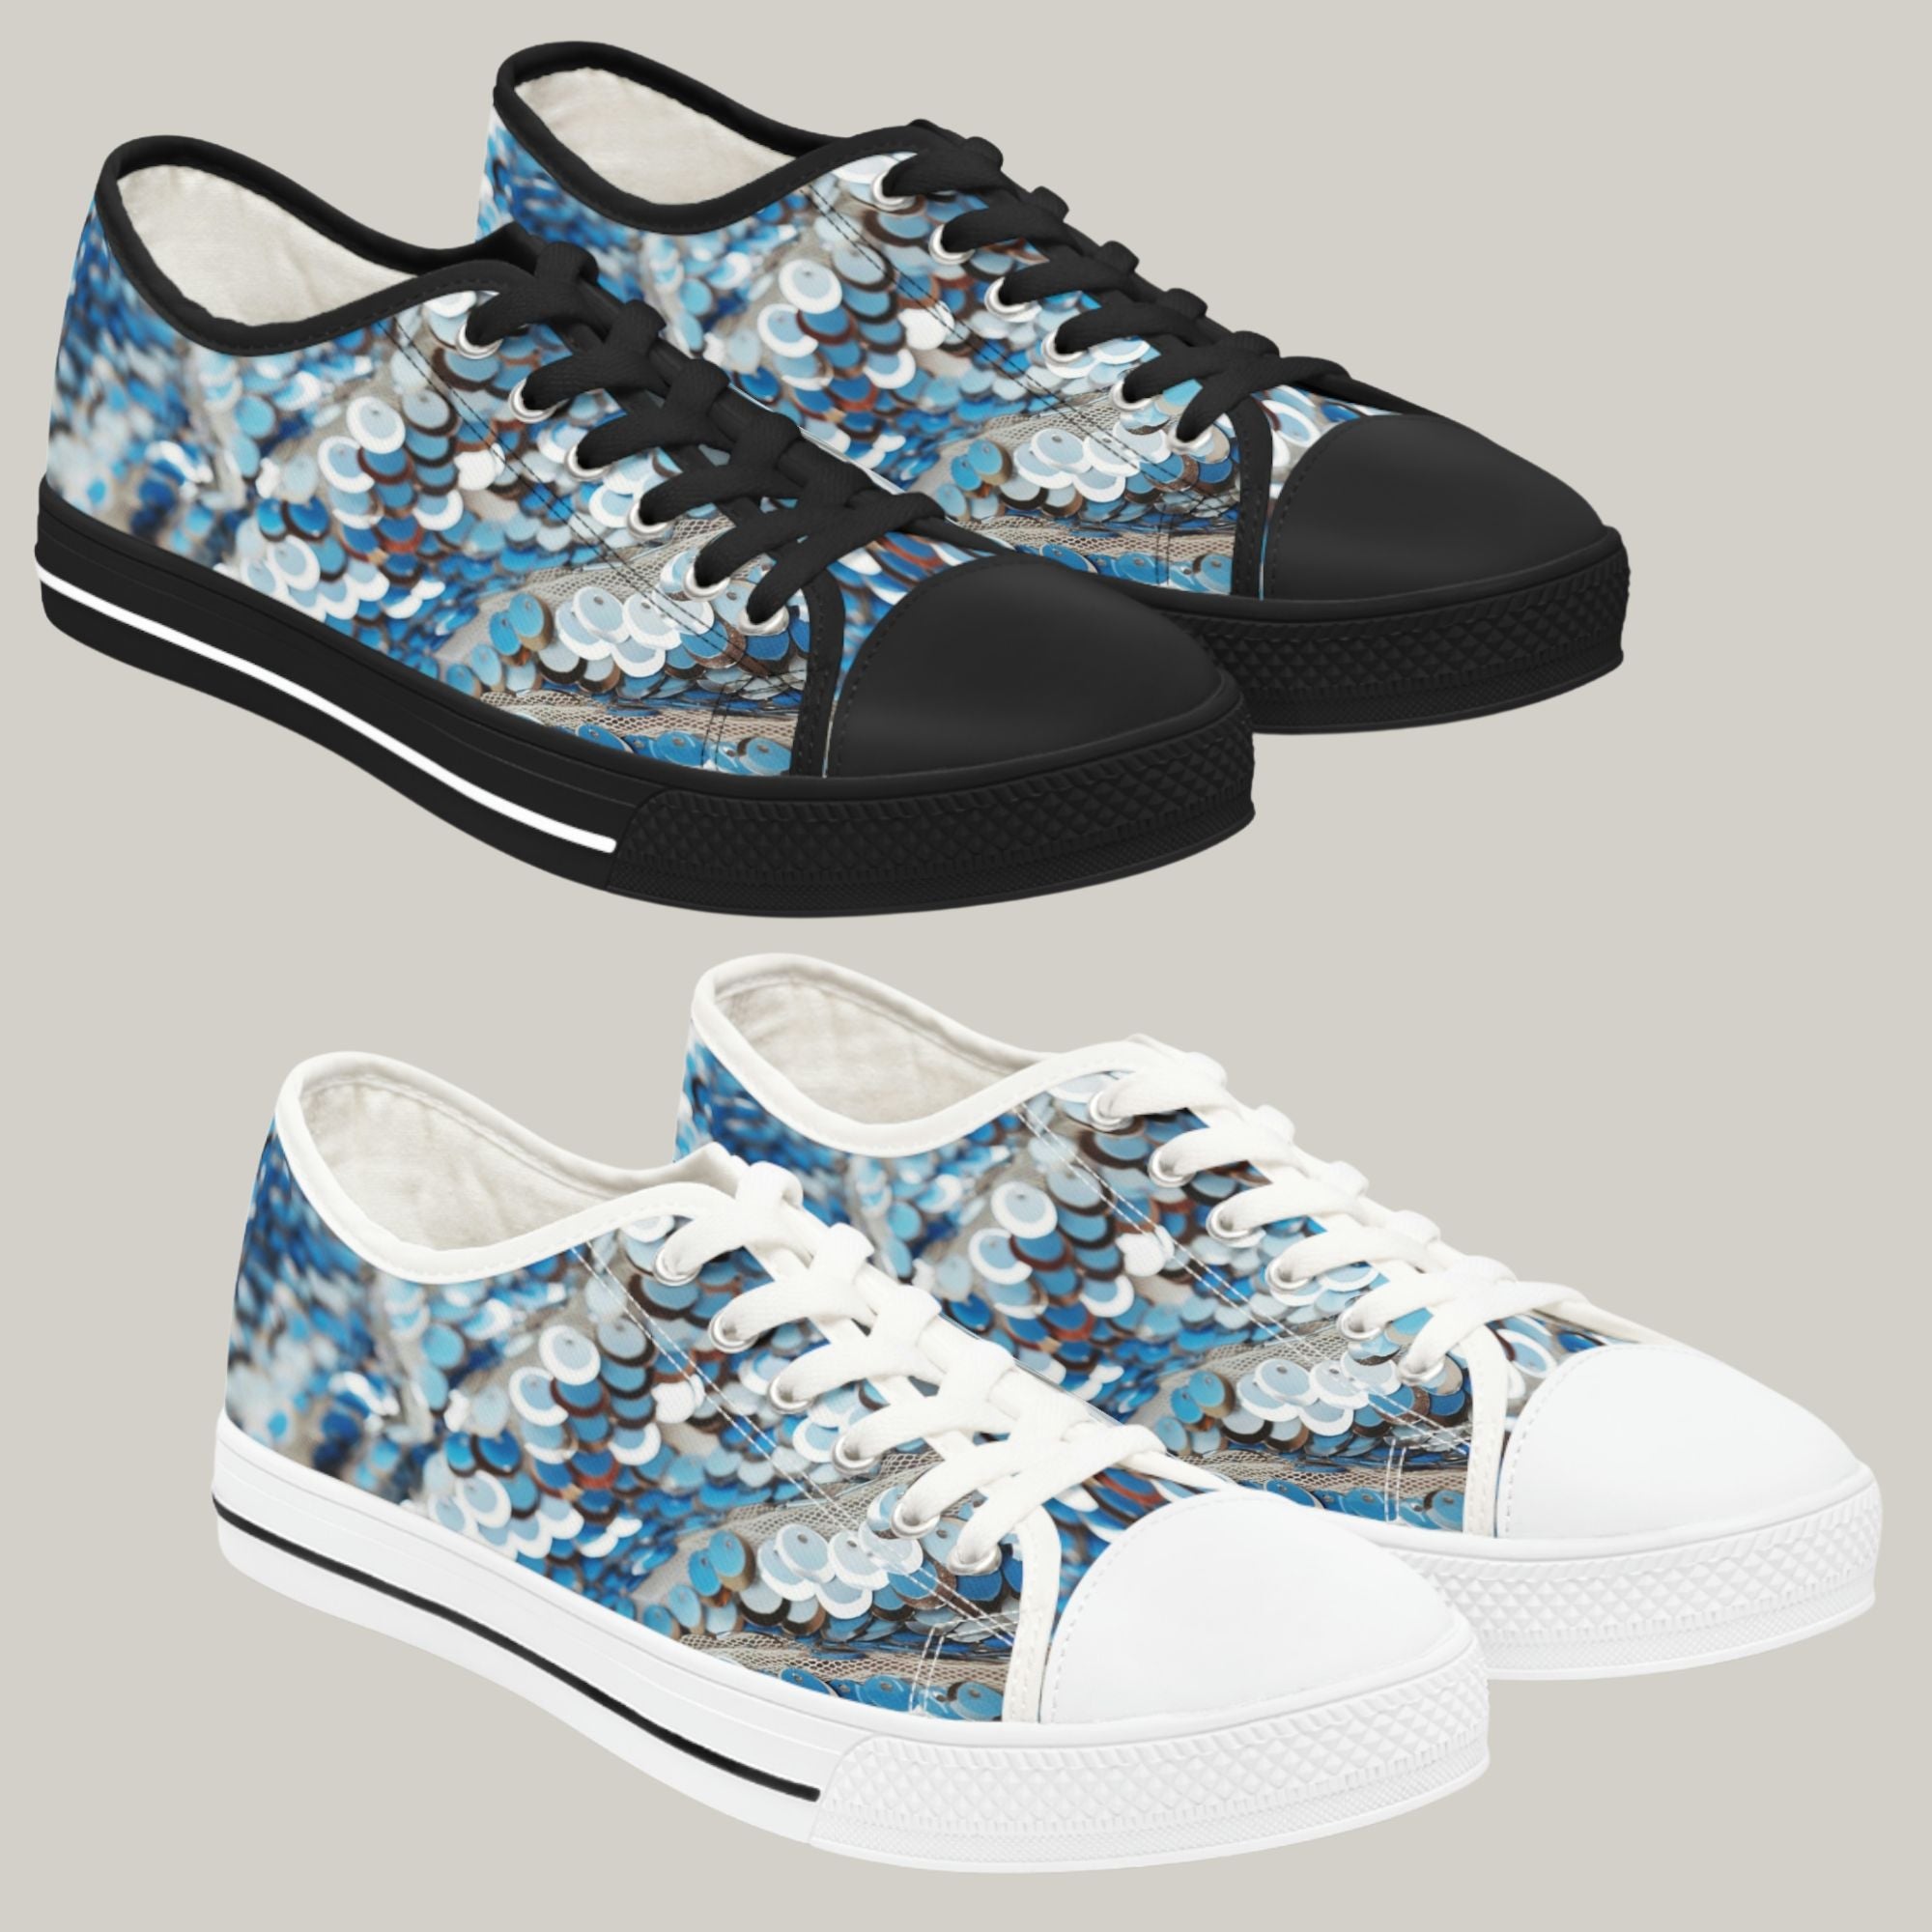 BLUE WAVE SEQUIN PRINT - Women's Low Top Sneakers Black and White Sole